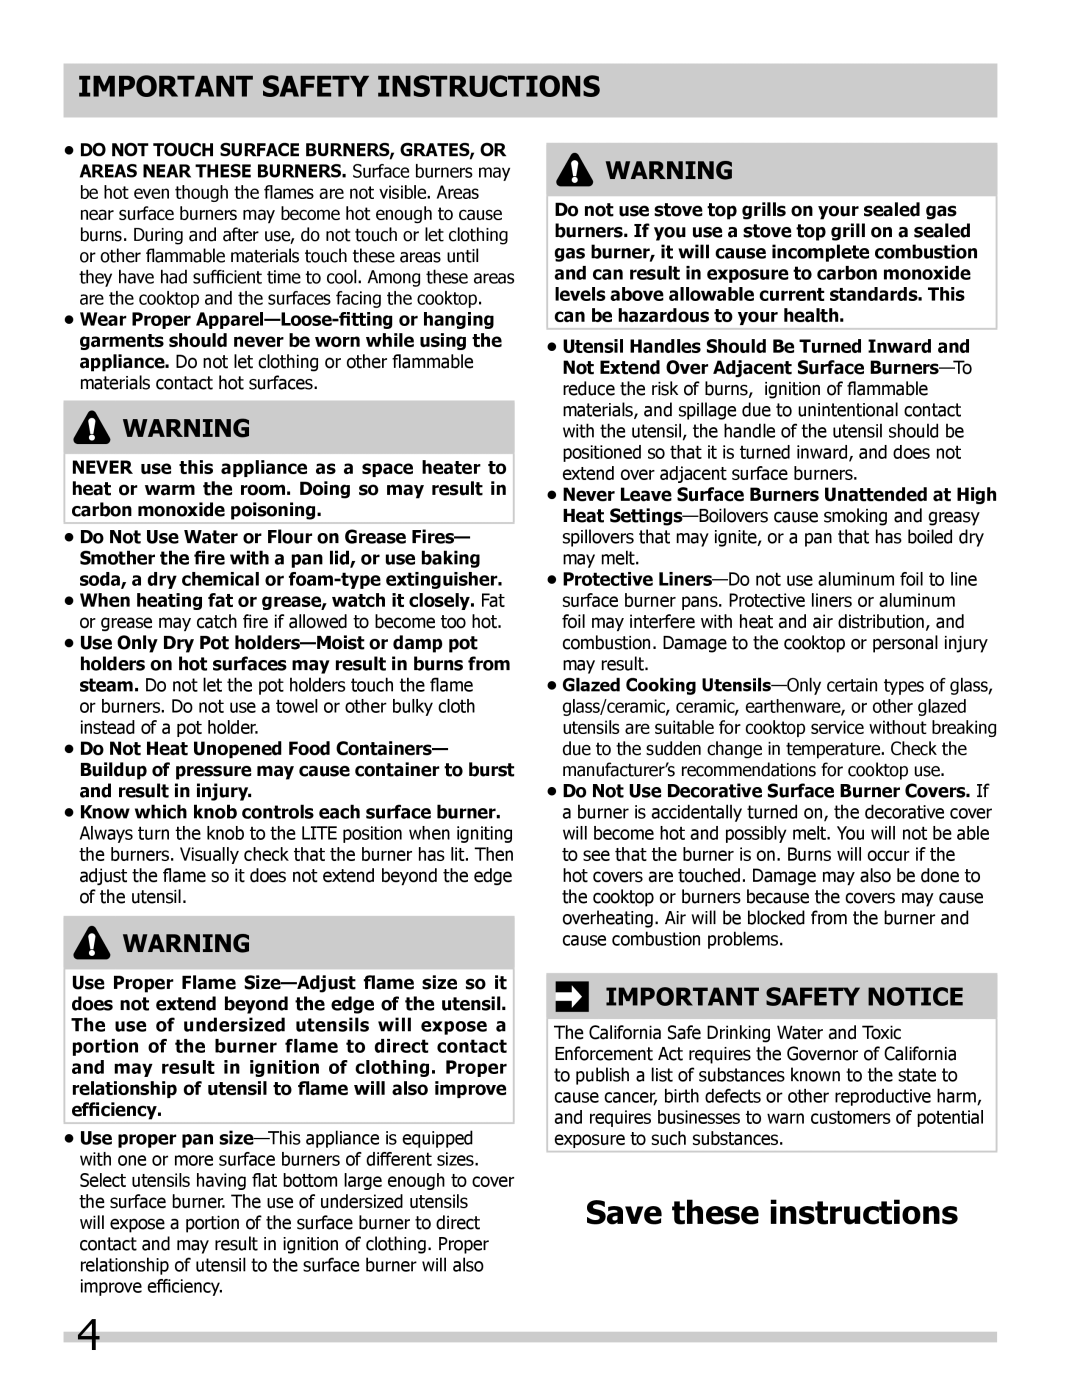 Frigidaire FFGC3025LW, FFGC3613LS Important Safety Notice, Do Not Heat Unopened Food Containers, Save these instructions 